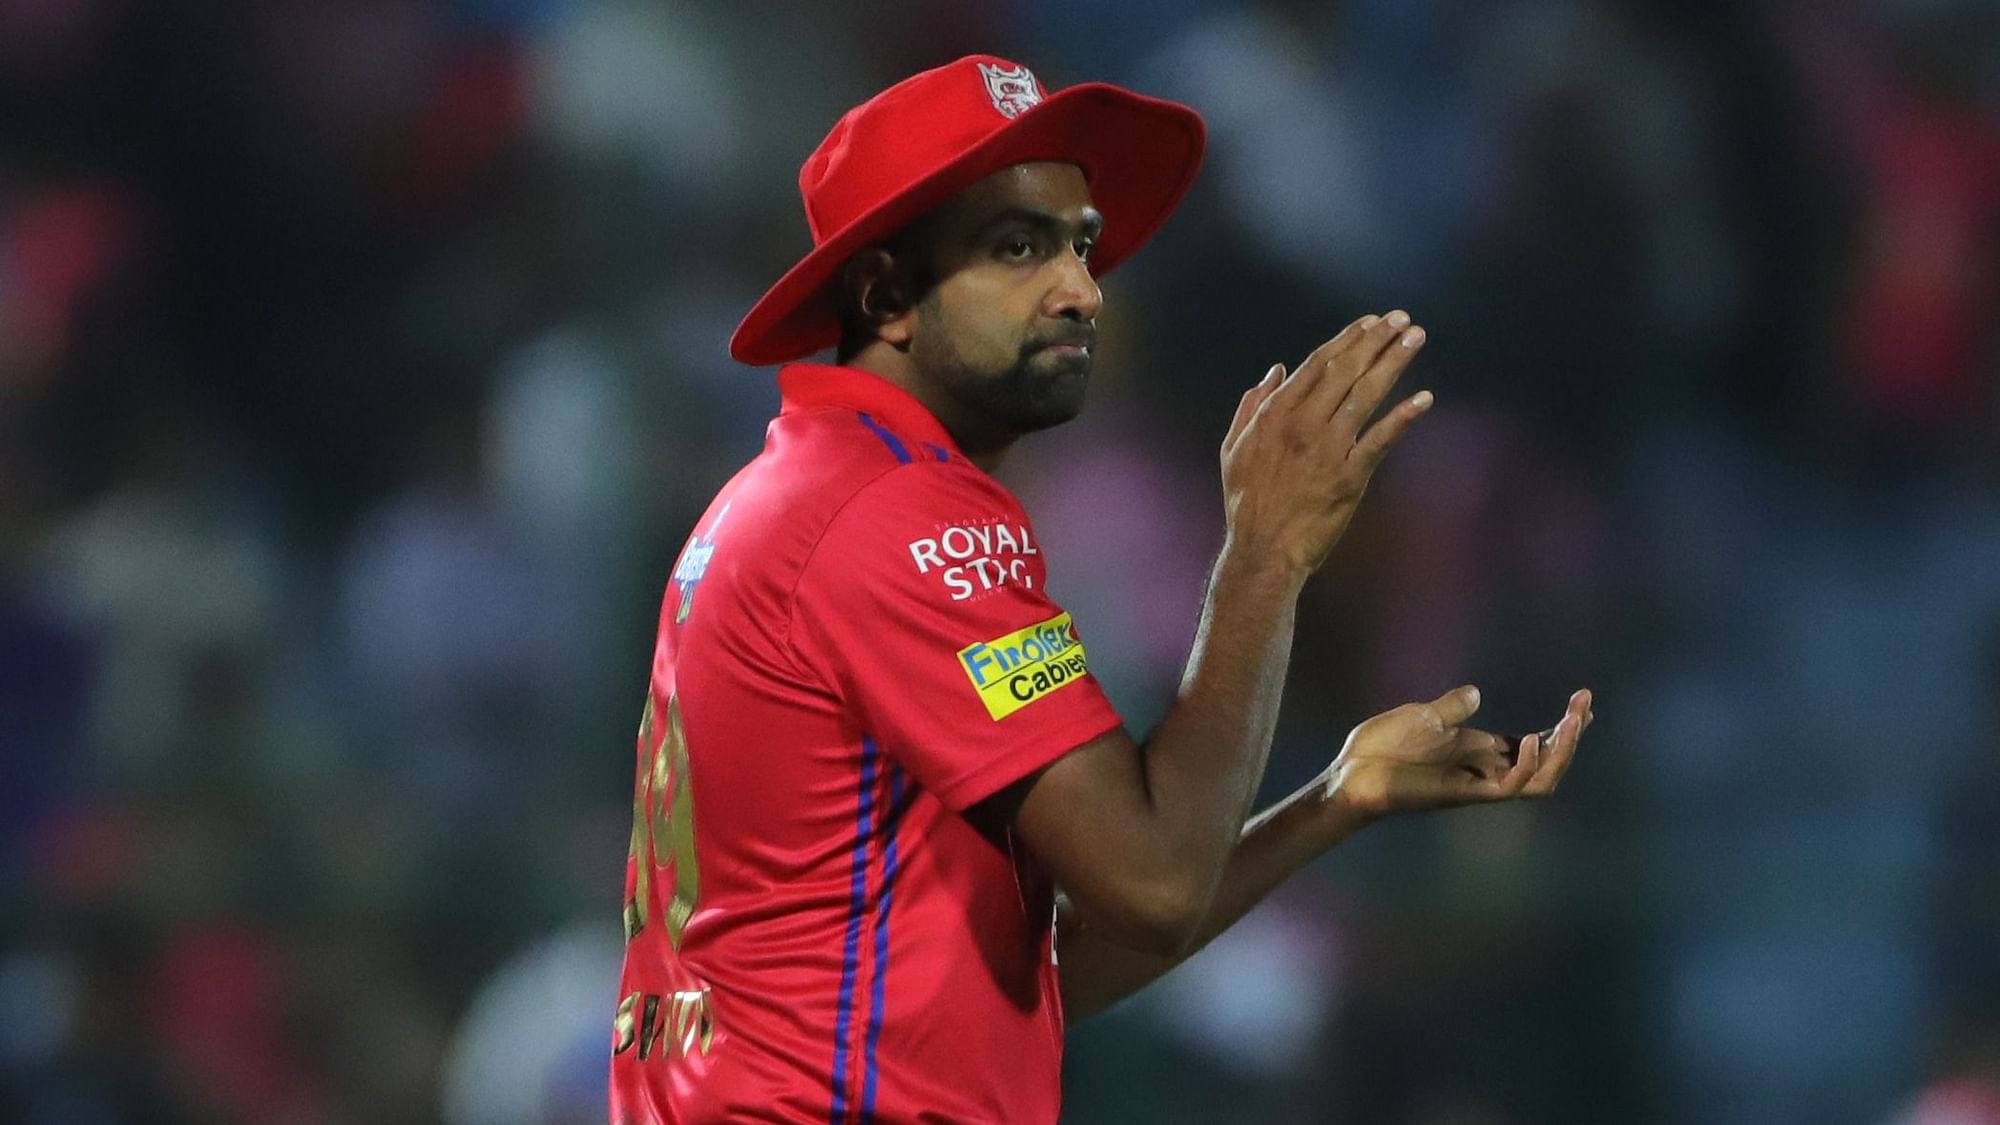 R Ashwin ‘Mankaded’ Jos Buttler in his team’s 14-run victory over Rajasthan.